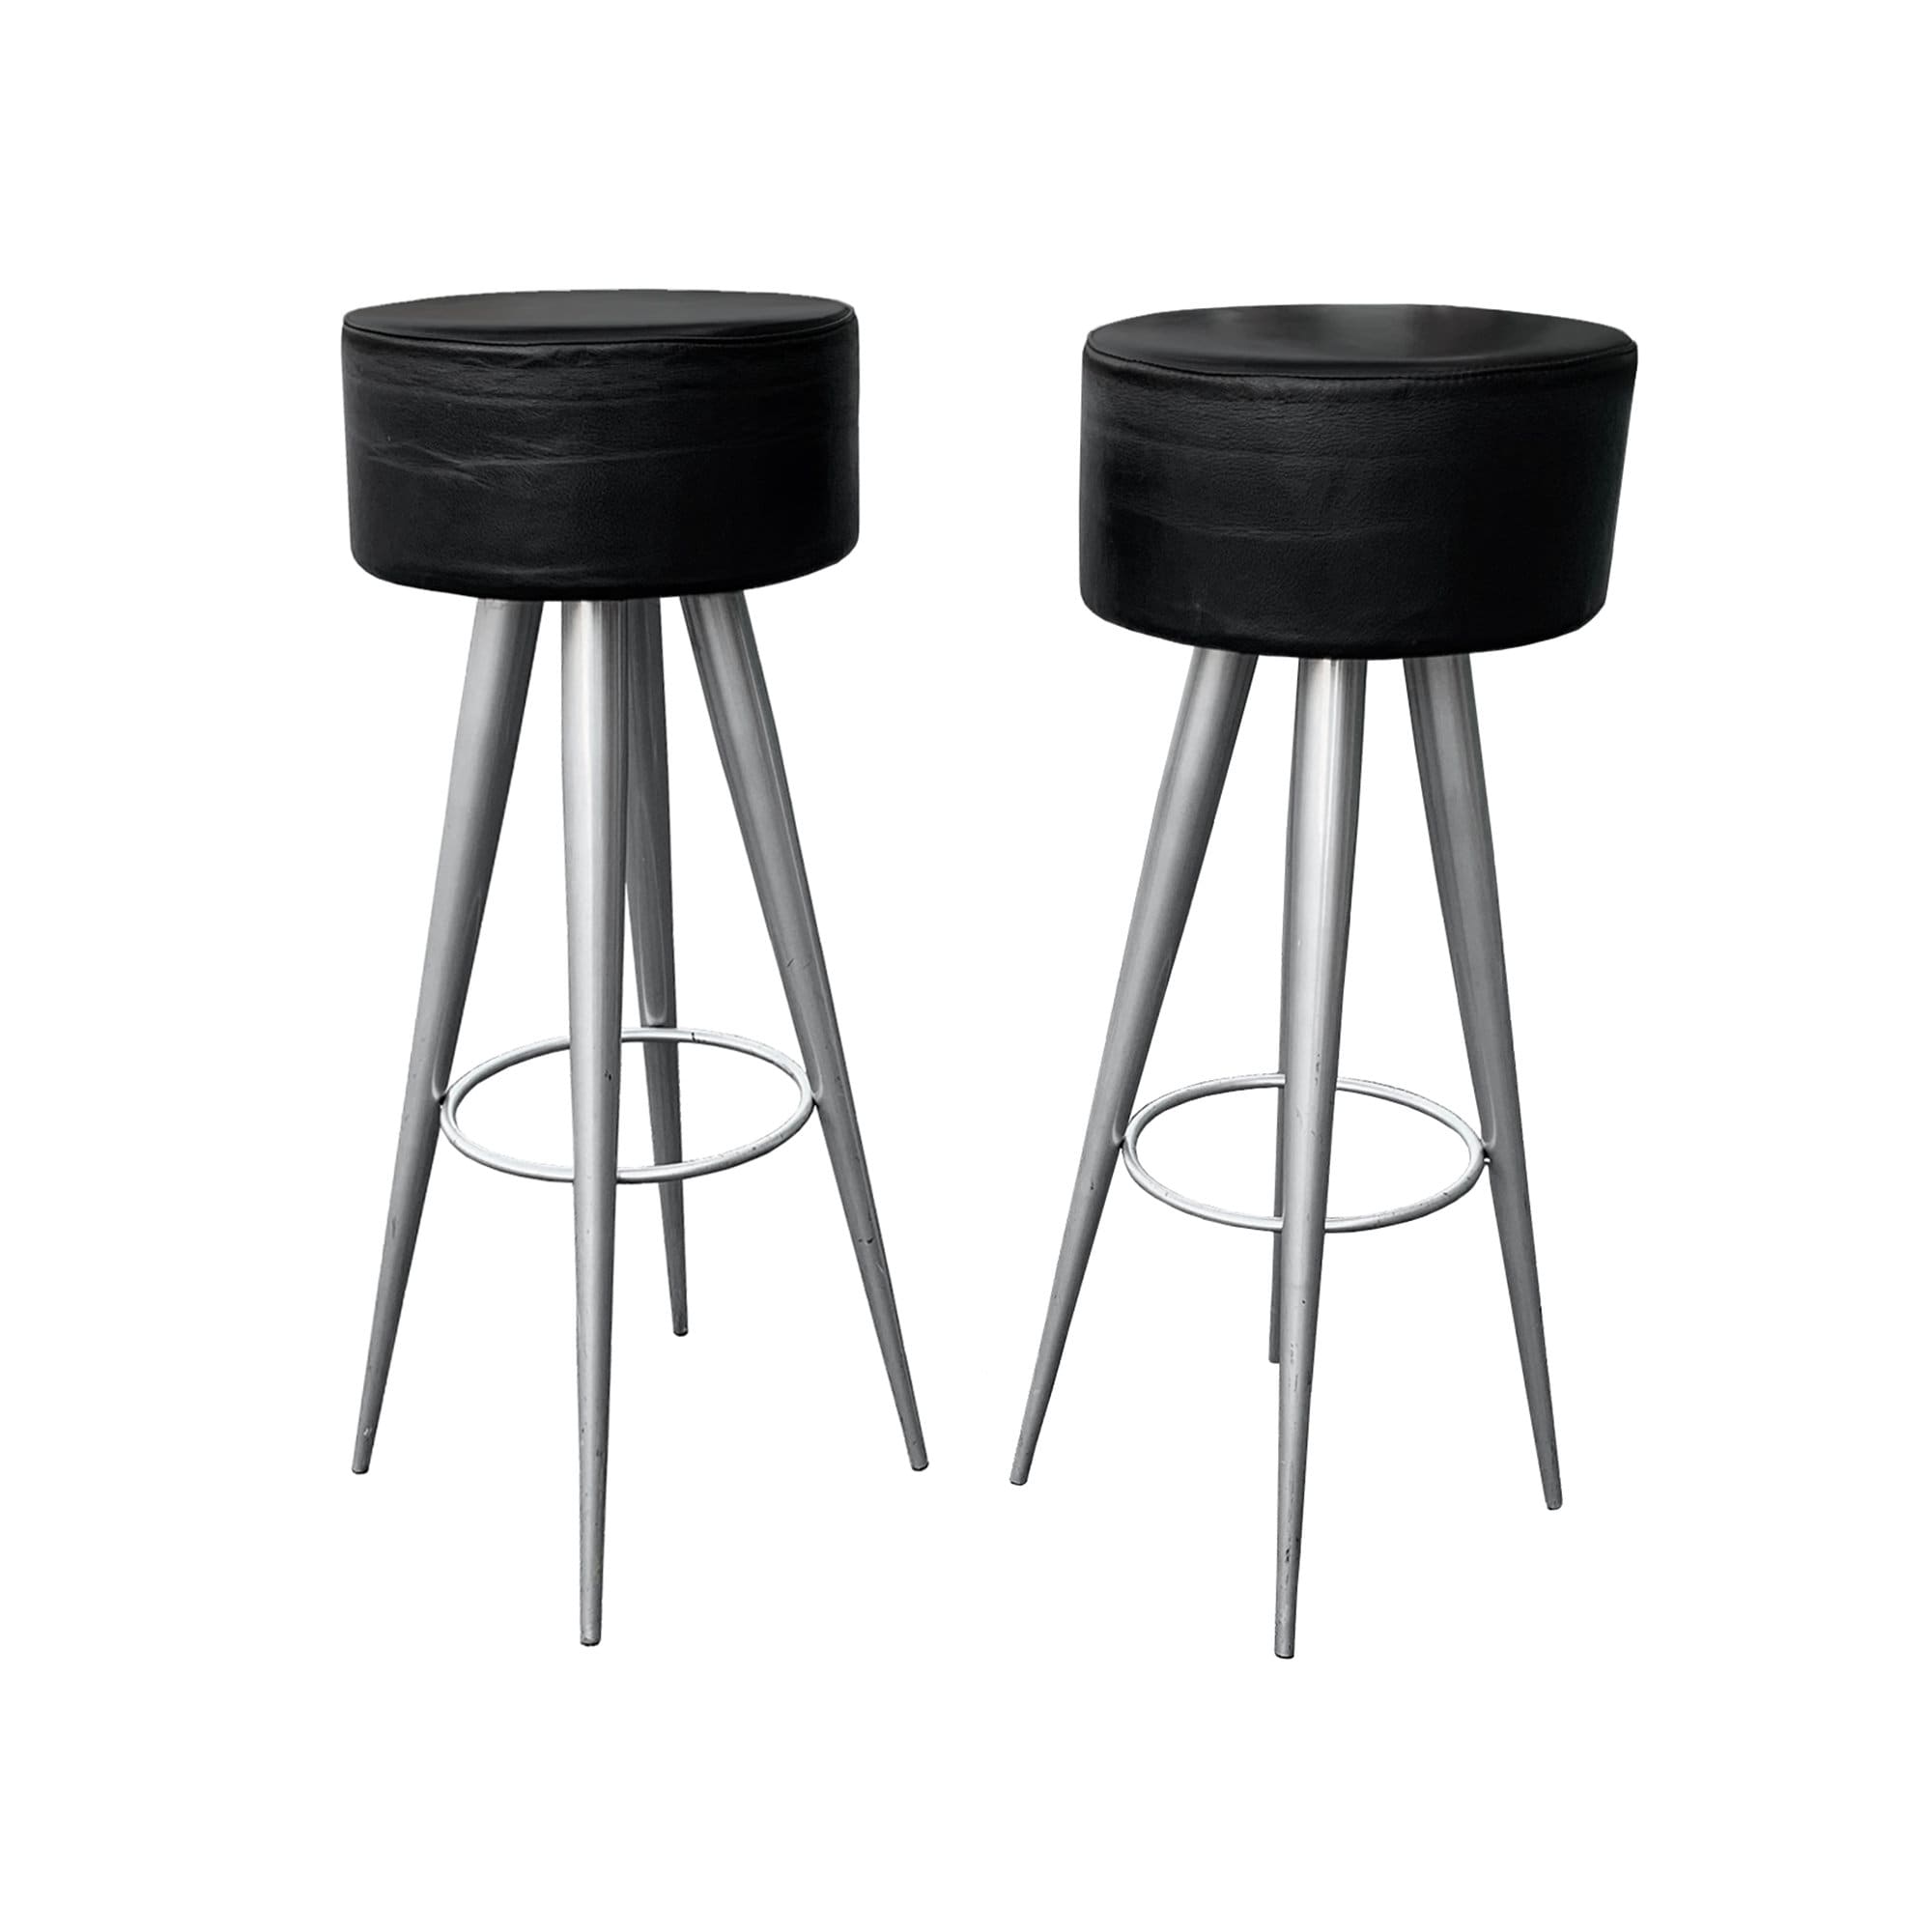 Modern Black Leather Bar Stools Made In, Modern Leather Bar Stools